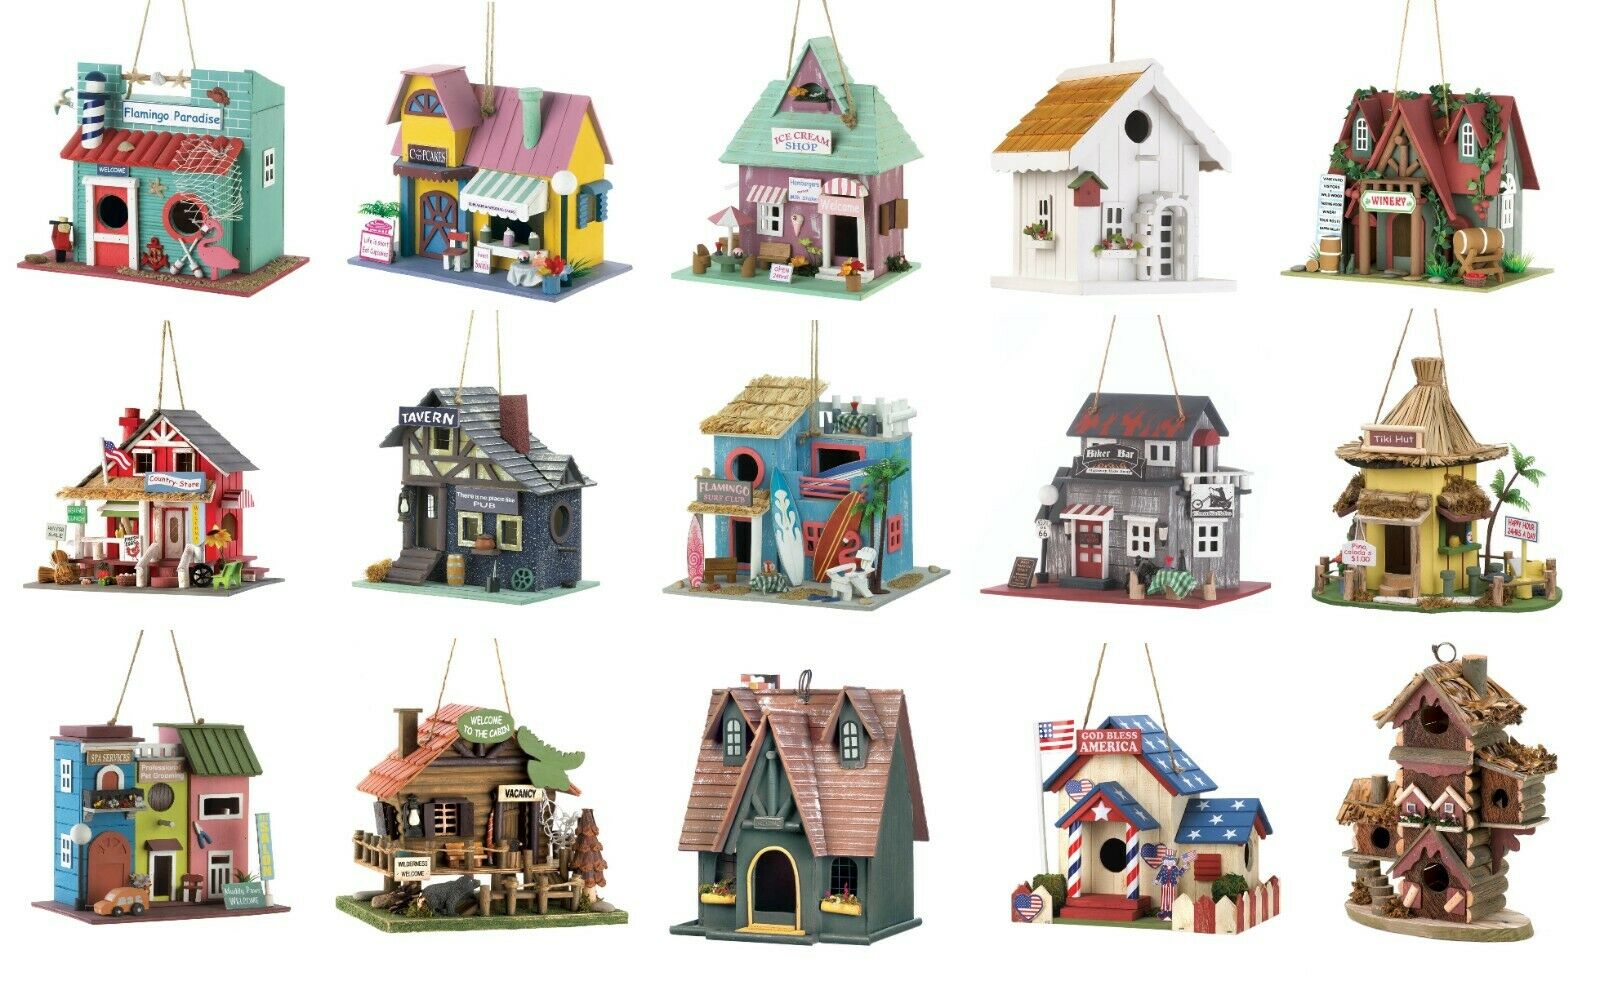 Functional Wood Birdhouses - Save Up To 25% - Variety of Themes - Yard Garden